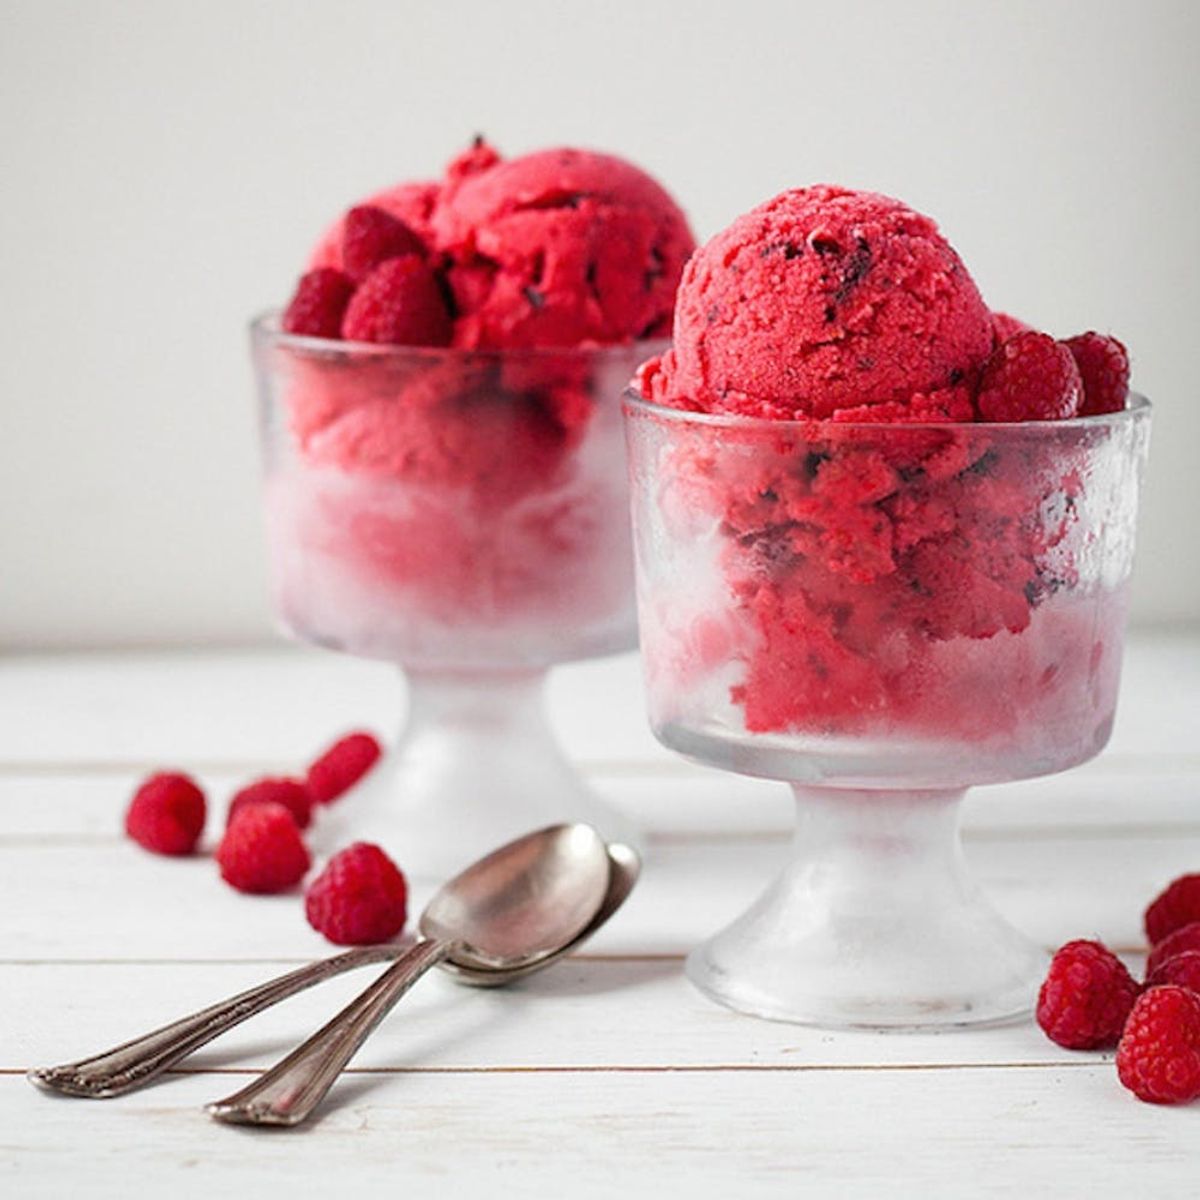 12 Vegan Ice Creams to Scoop If You Just Can’t With Dairy